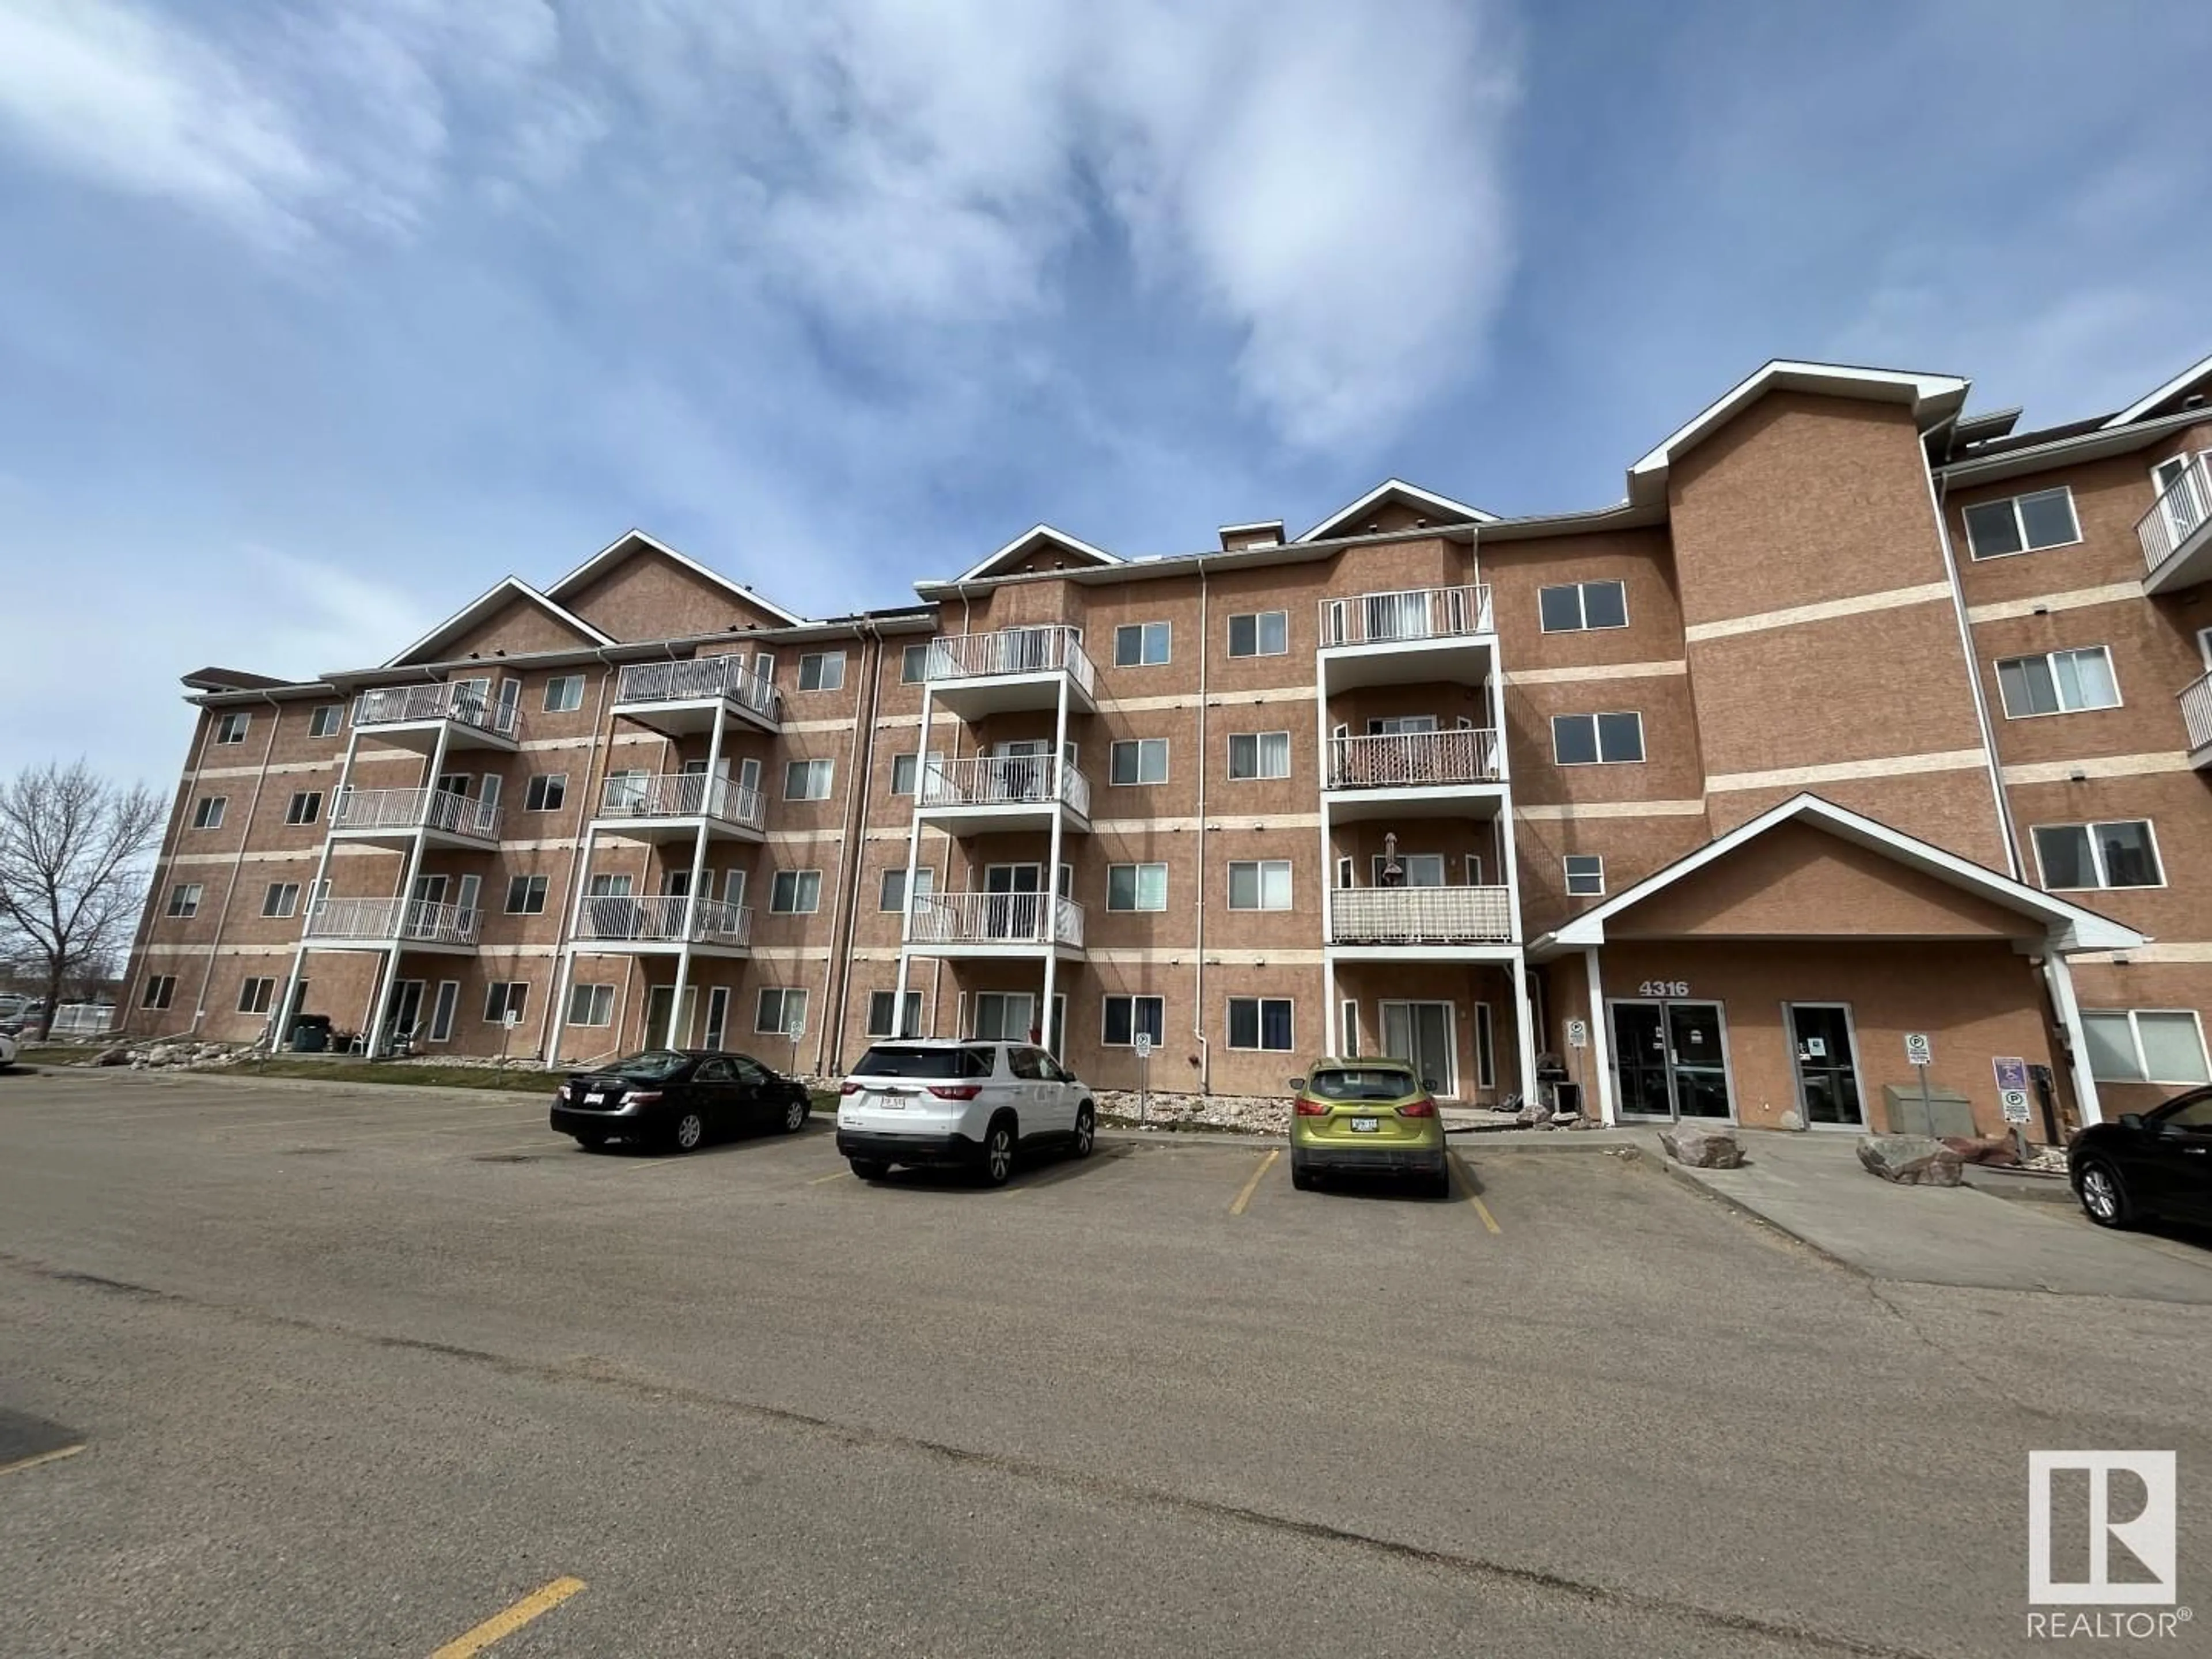 A pic from exterior of the house or condo for #412 4316 139 AV NW, Edmonton Alberta T5Y0L1